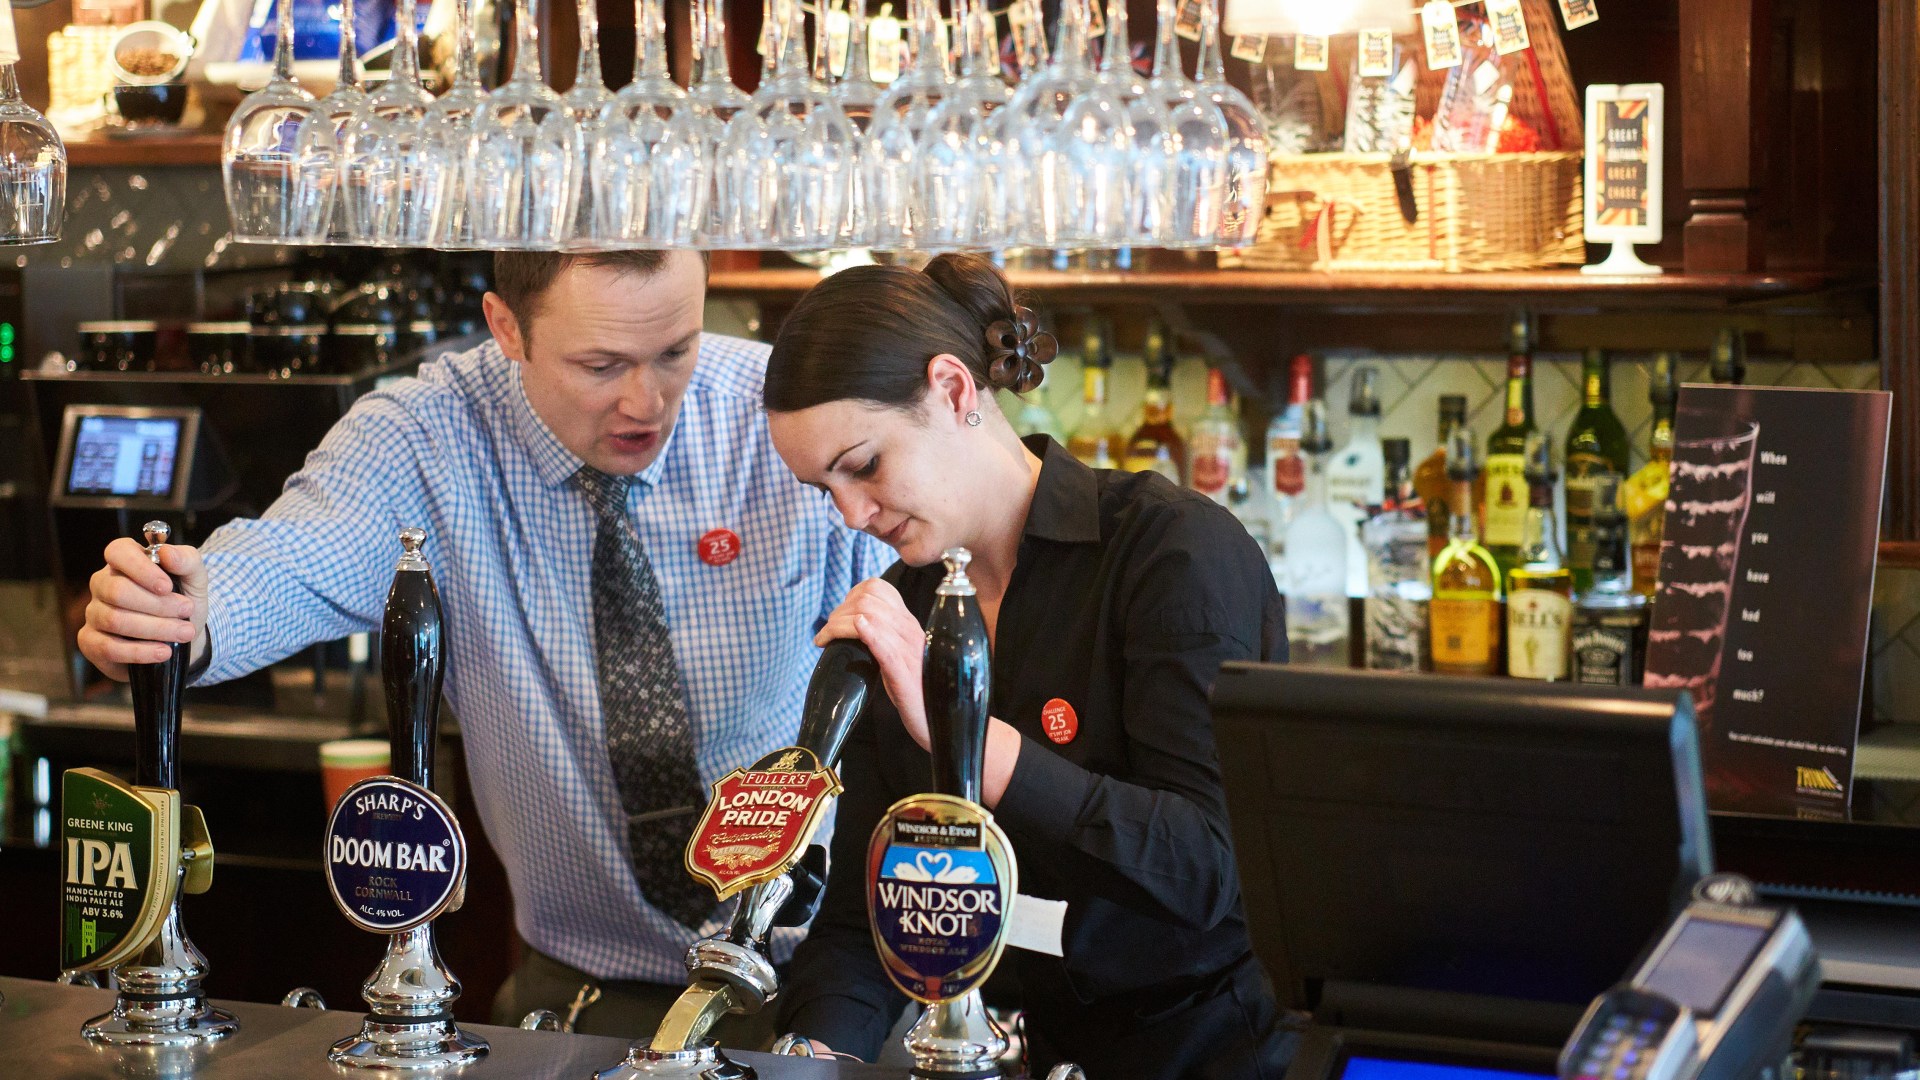 Five tricks Wetherspoons use to make you spend more, according to a marketing expert – from the menu to staff language [Video]